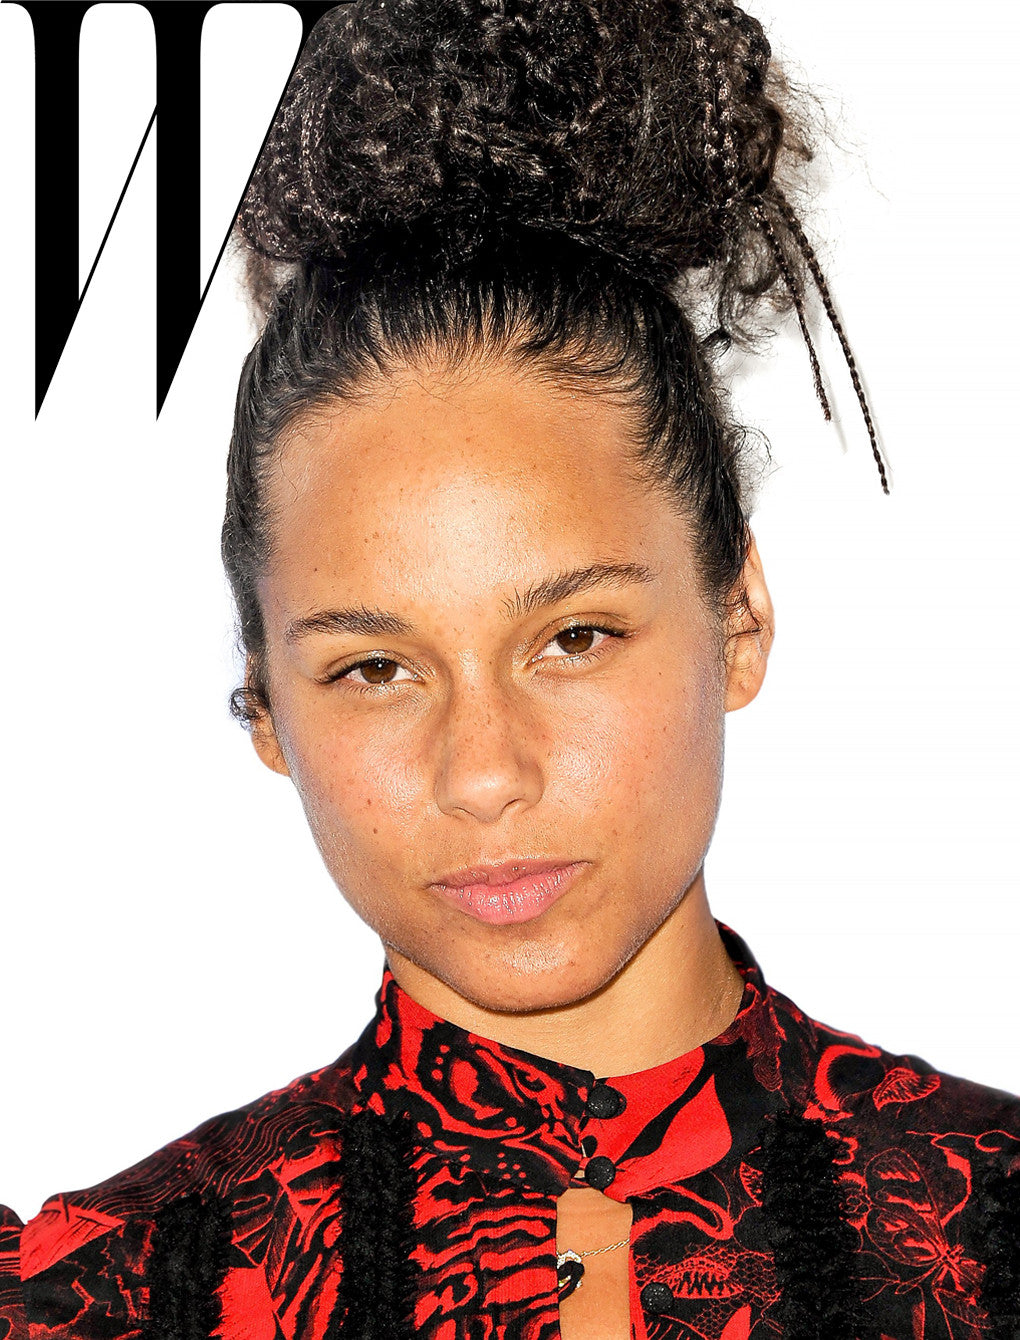 Alicia Keys' No Makeup Look and Glowing Complexion using MV Organic Skincare